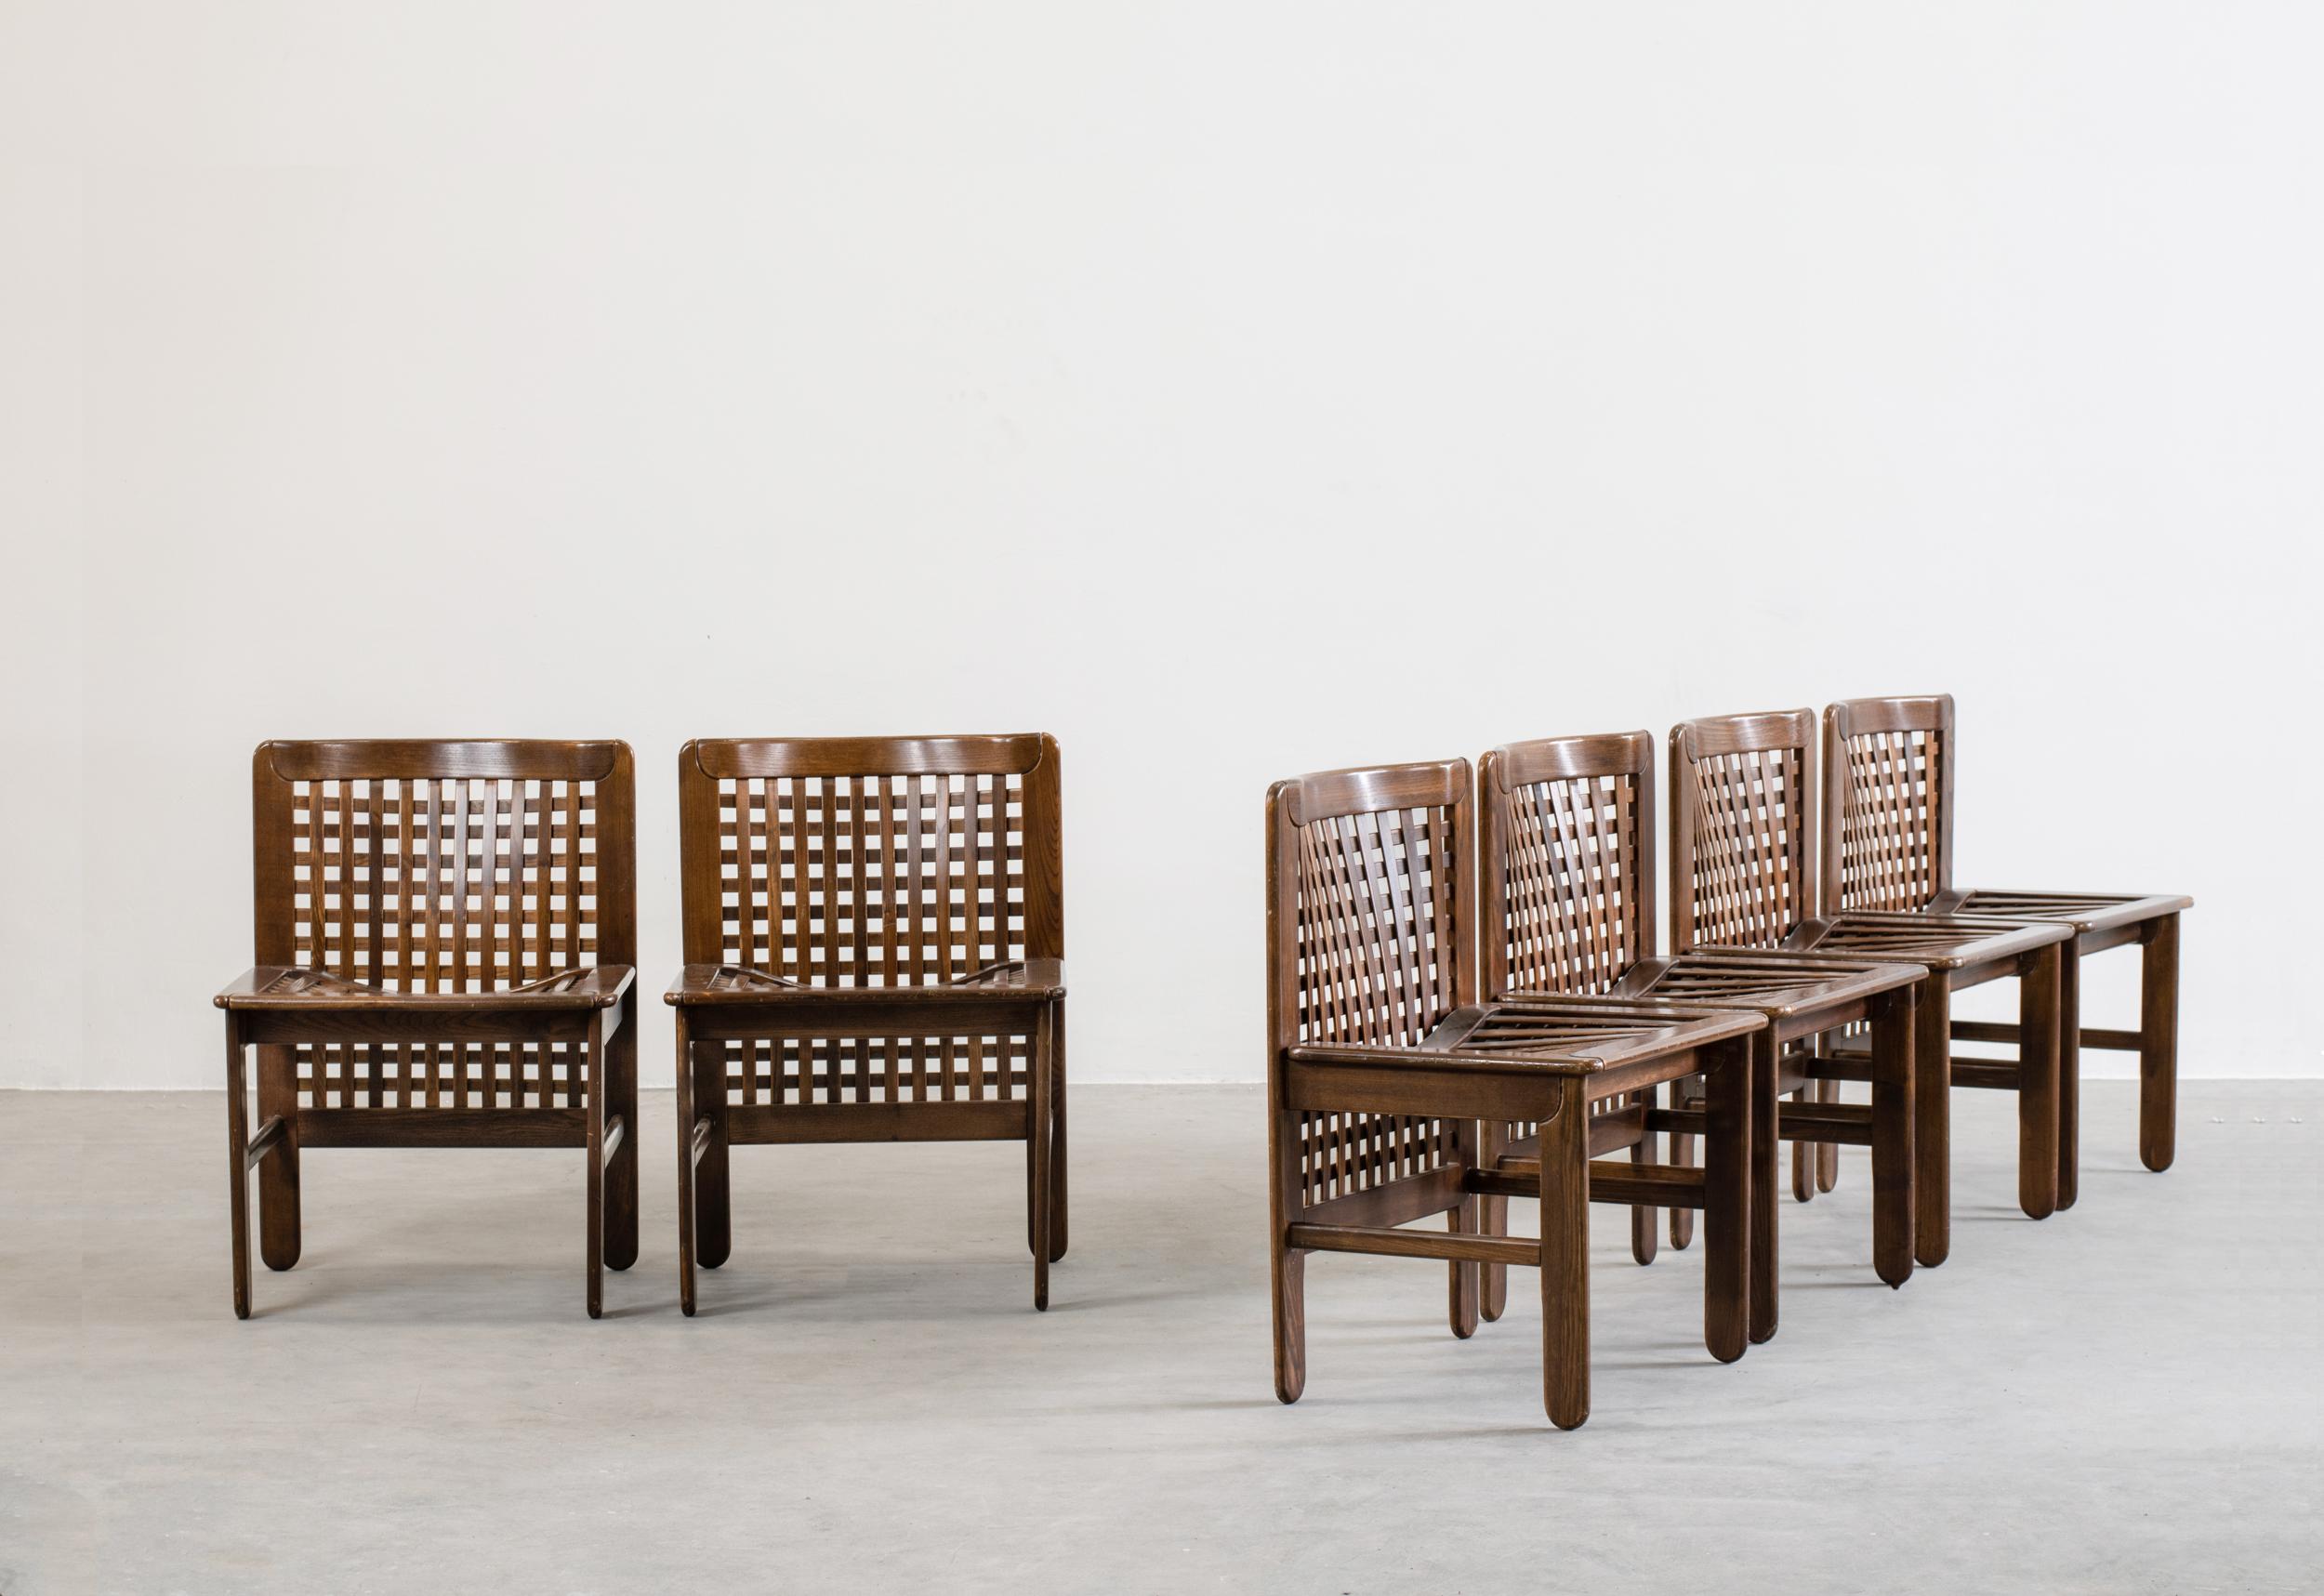 Beautiful living room set of six chairs in woven wood, designed by Tobia & Afra Scarpa, Italian Manufacture, 1960s.